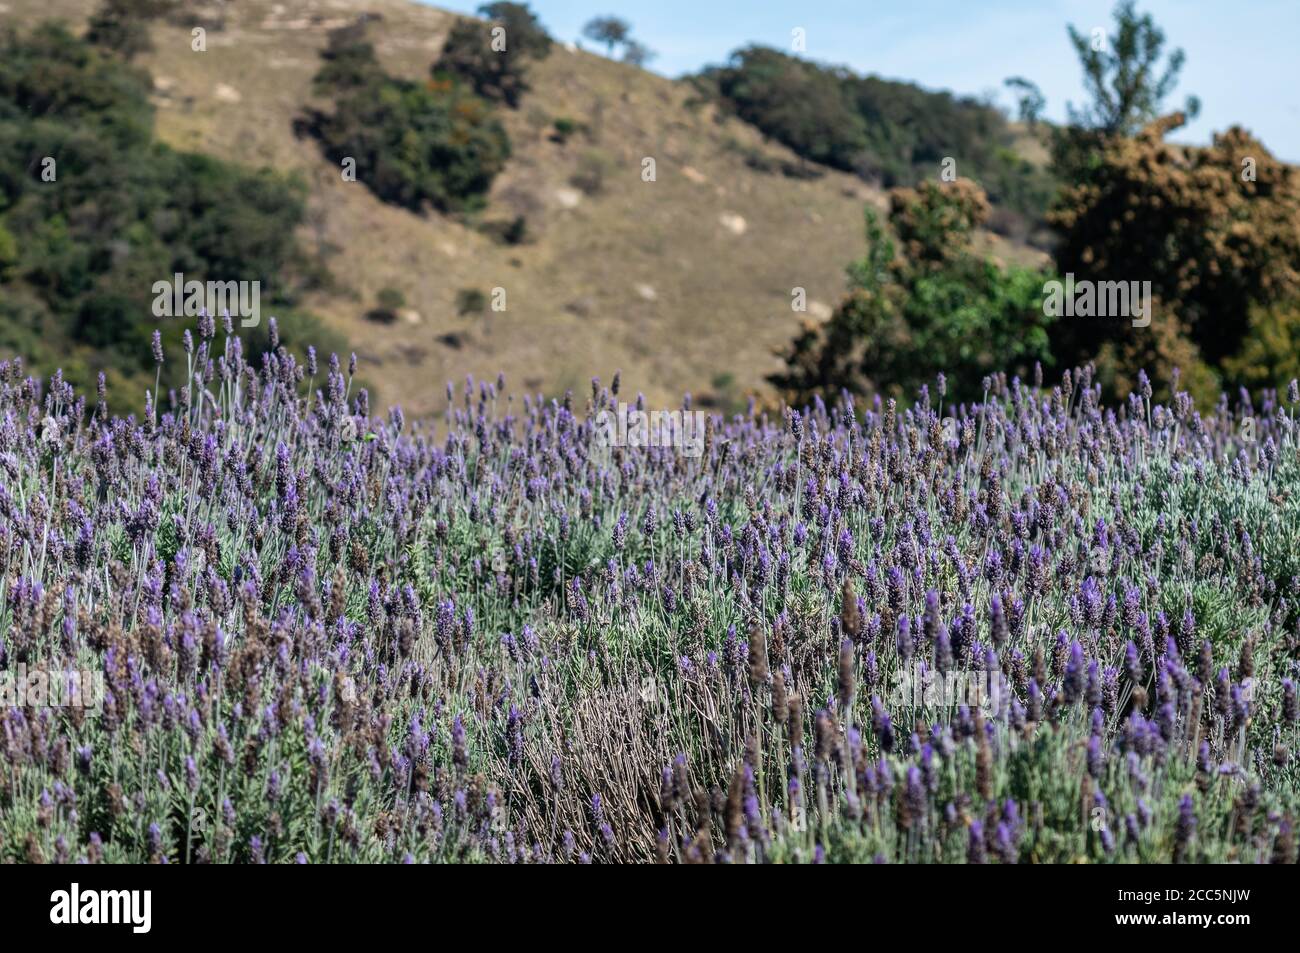 Close up of some Lavender flowers (Lavandula dentata - species of flowering plant - Lamiaceae family) cultivated in the agriculture fields of Cunha. Stock Photo